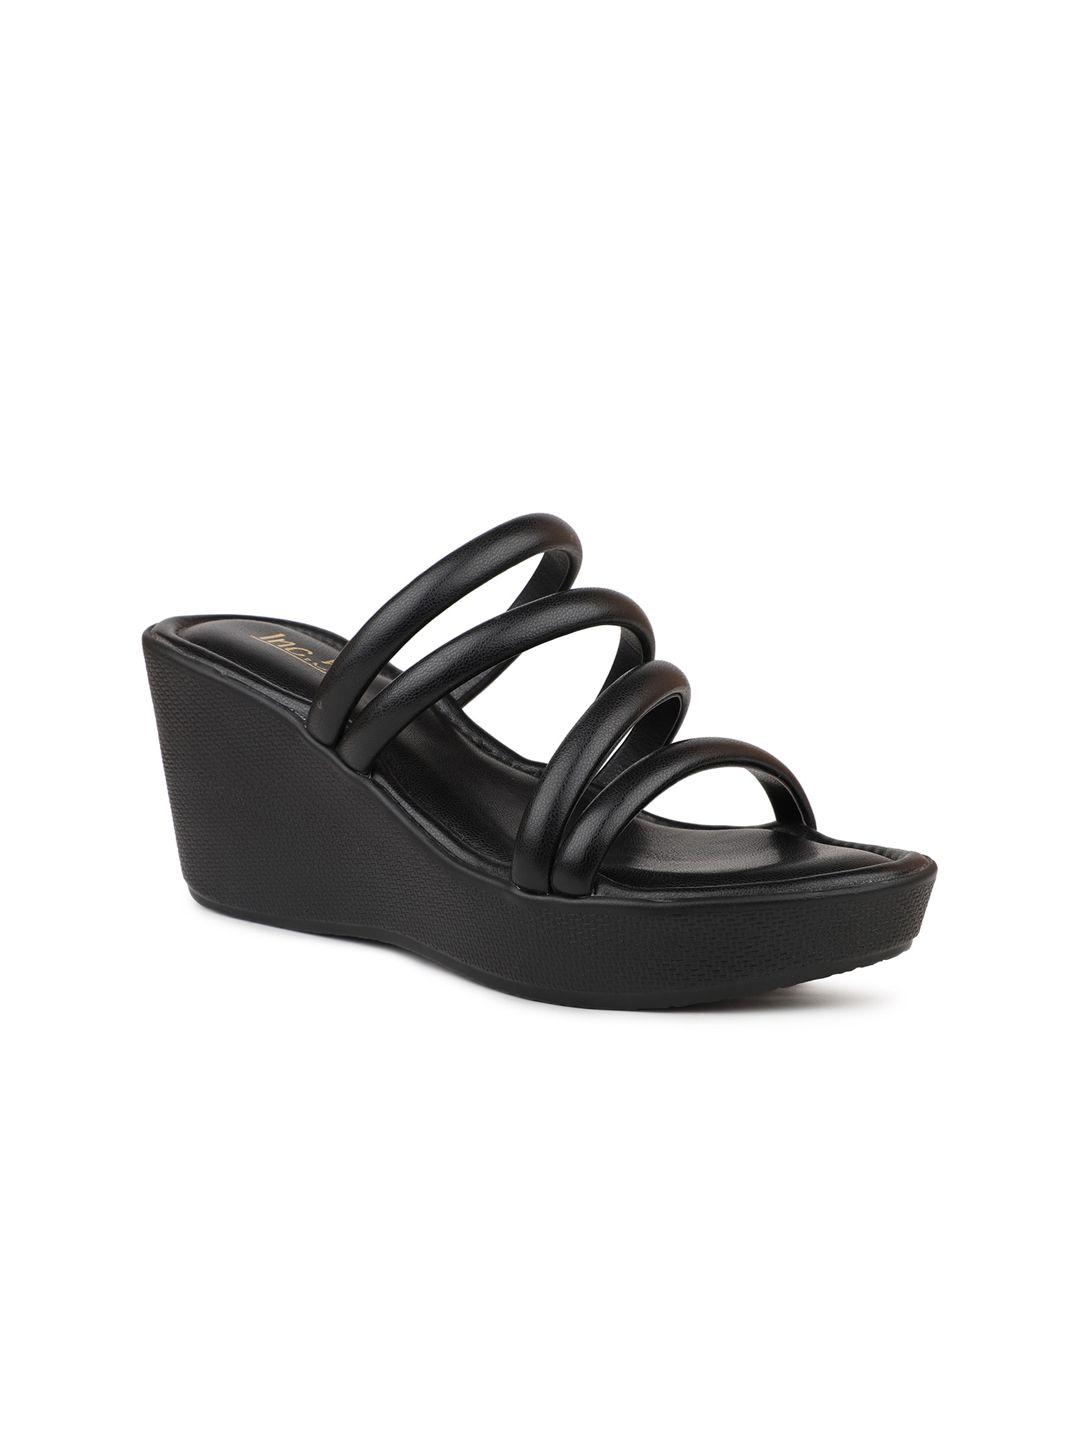 inc-5-solid-open-toe-wedges